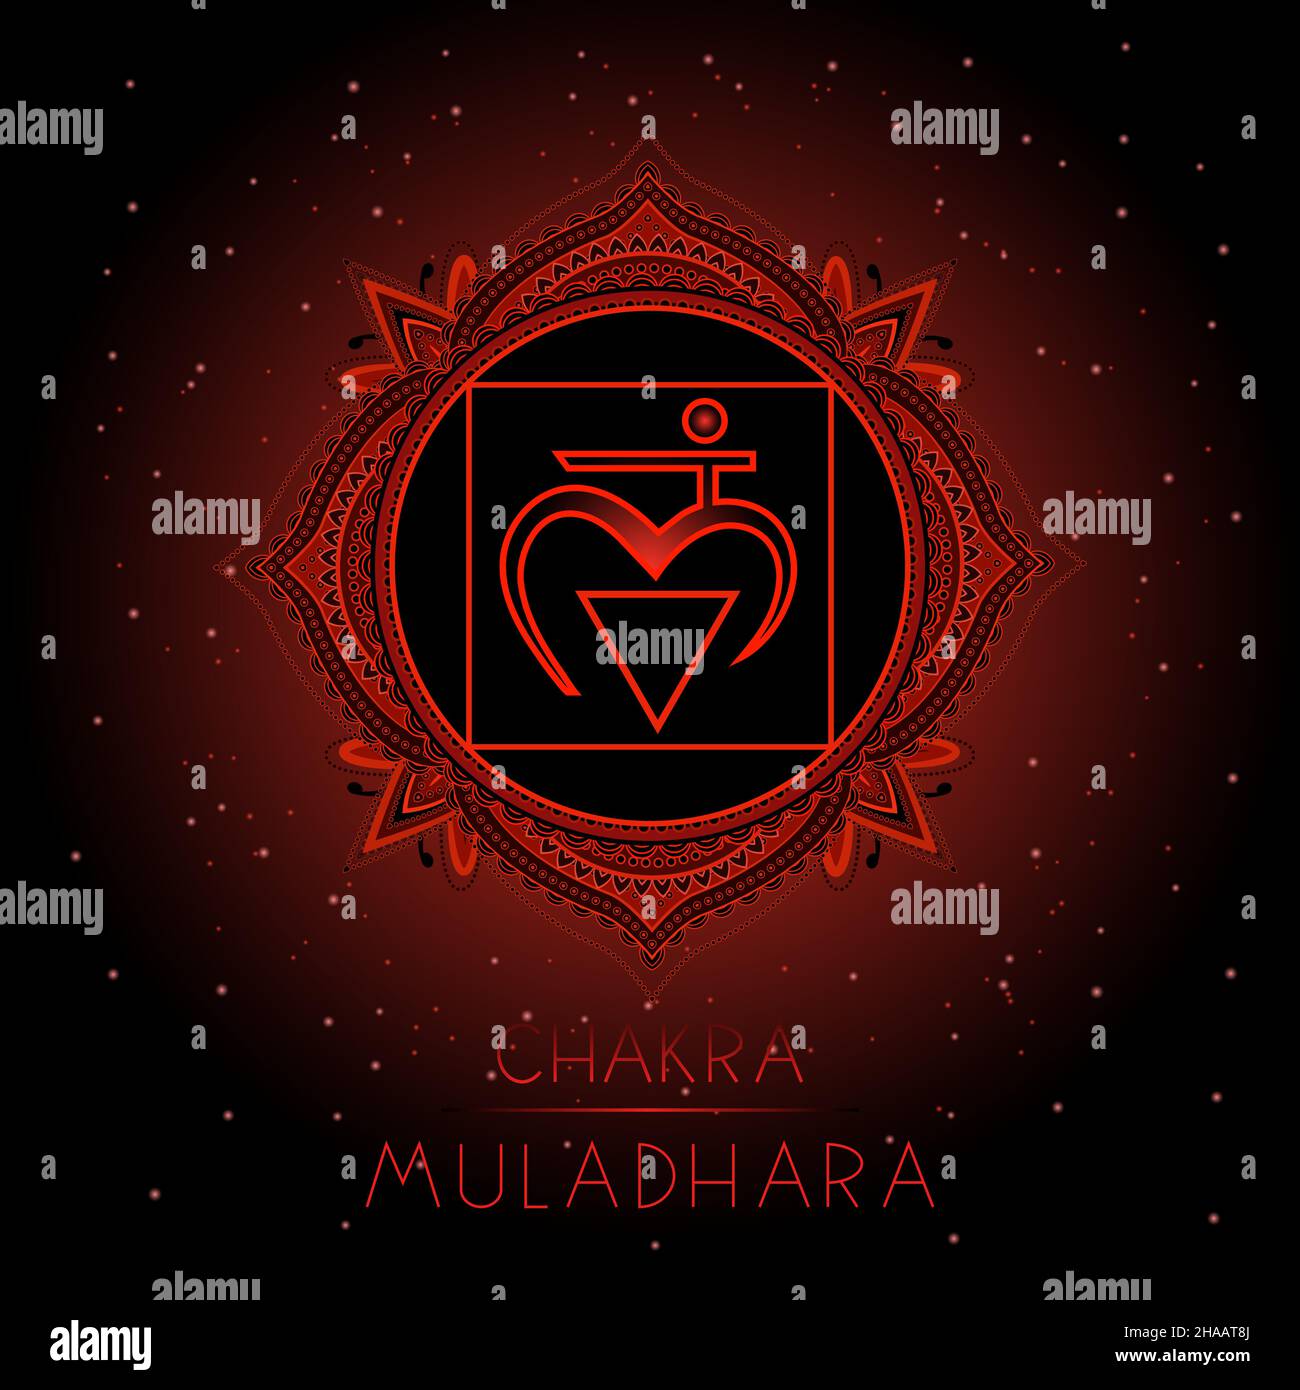 Vector illustration with symbol Muladhara - Root chakra on black background. Round mandala pattern and hand drawn lettering. Colored. Stock Vector